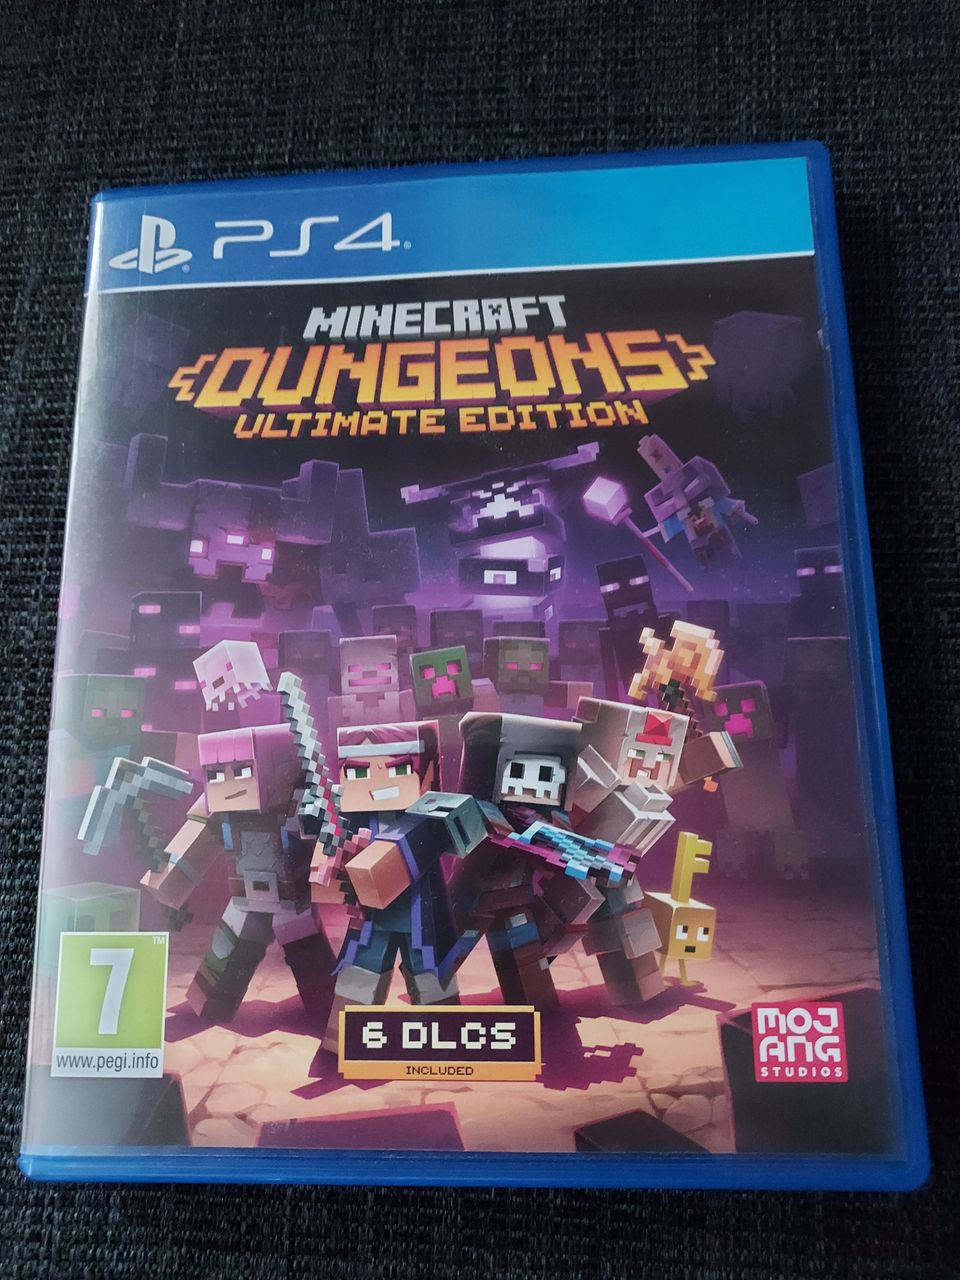 Ps4 minegraft dungeons ultimate edition